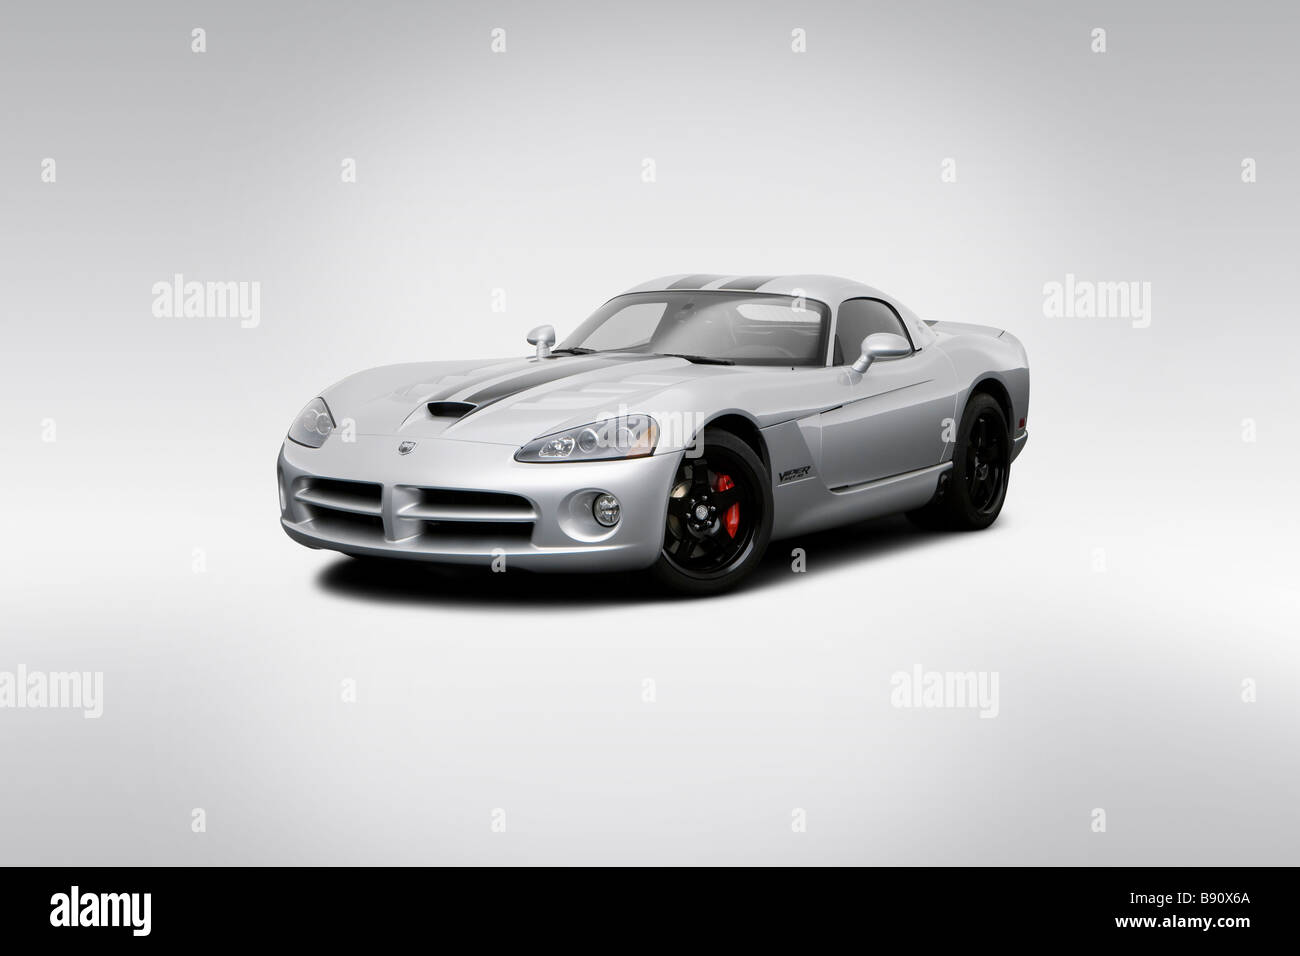 2009 Dodge Viper SRT-10 Coupe in Silver - Front angle view Stock Photo